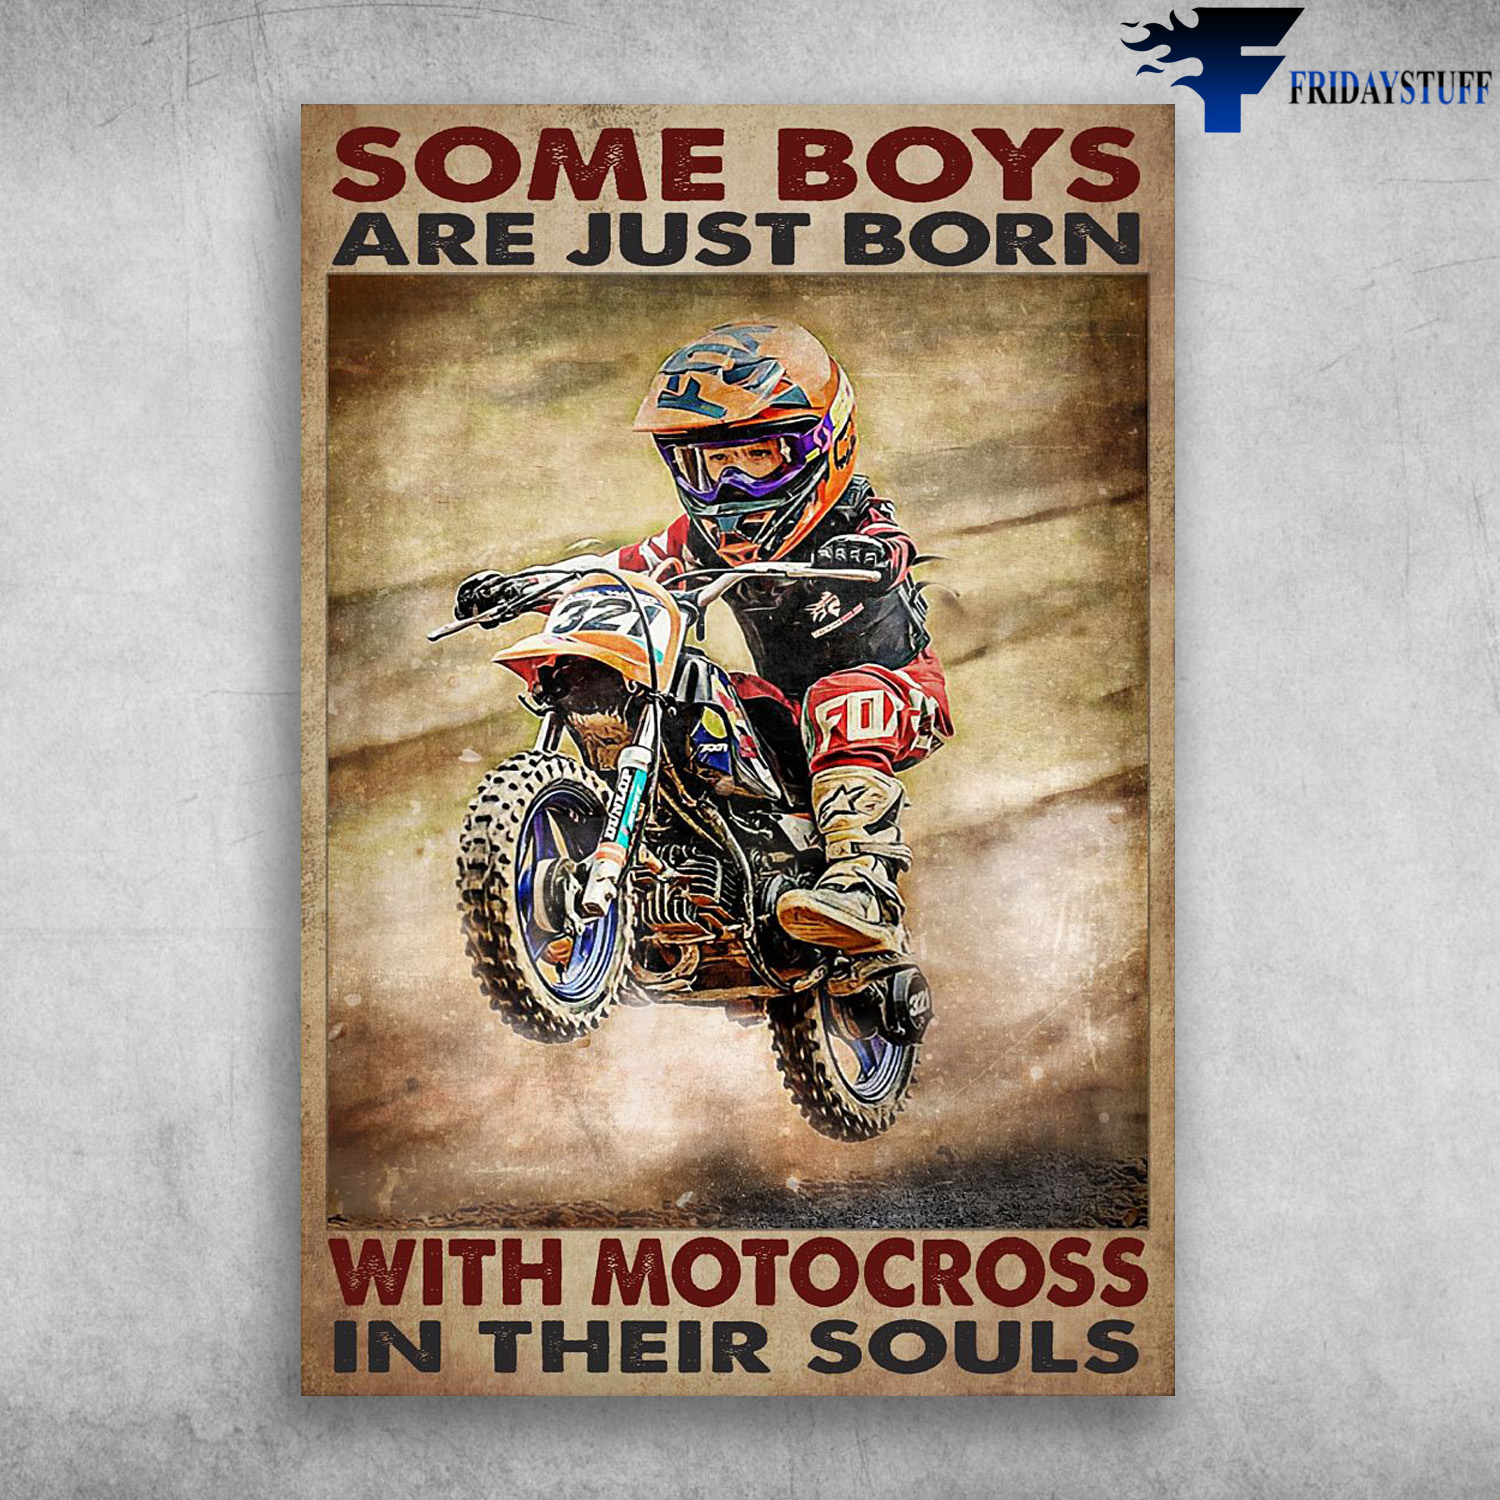 The Boy Motocross - Some Boys Are Just Born, With Motocross In Their Souls